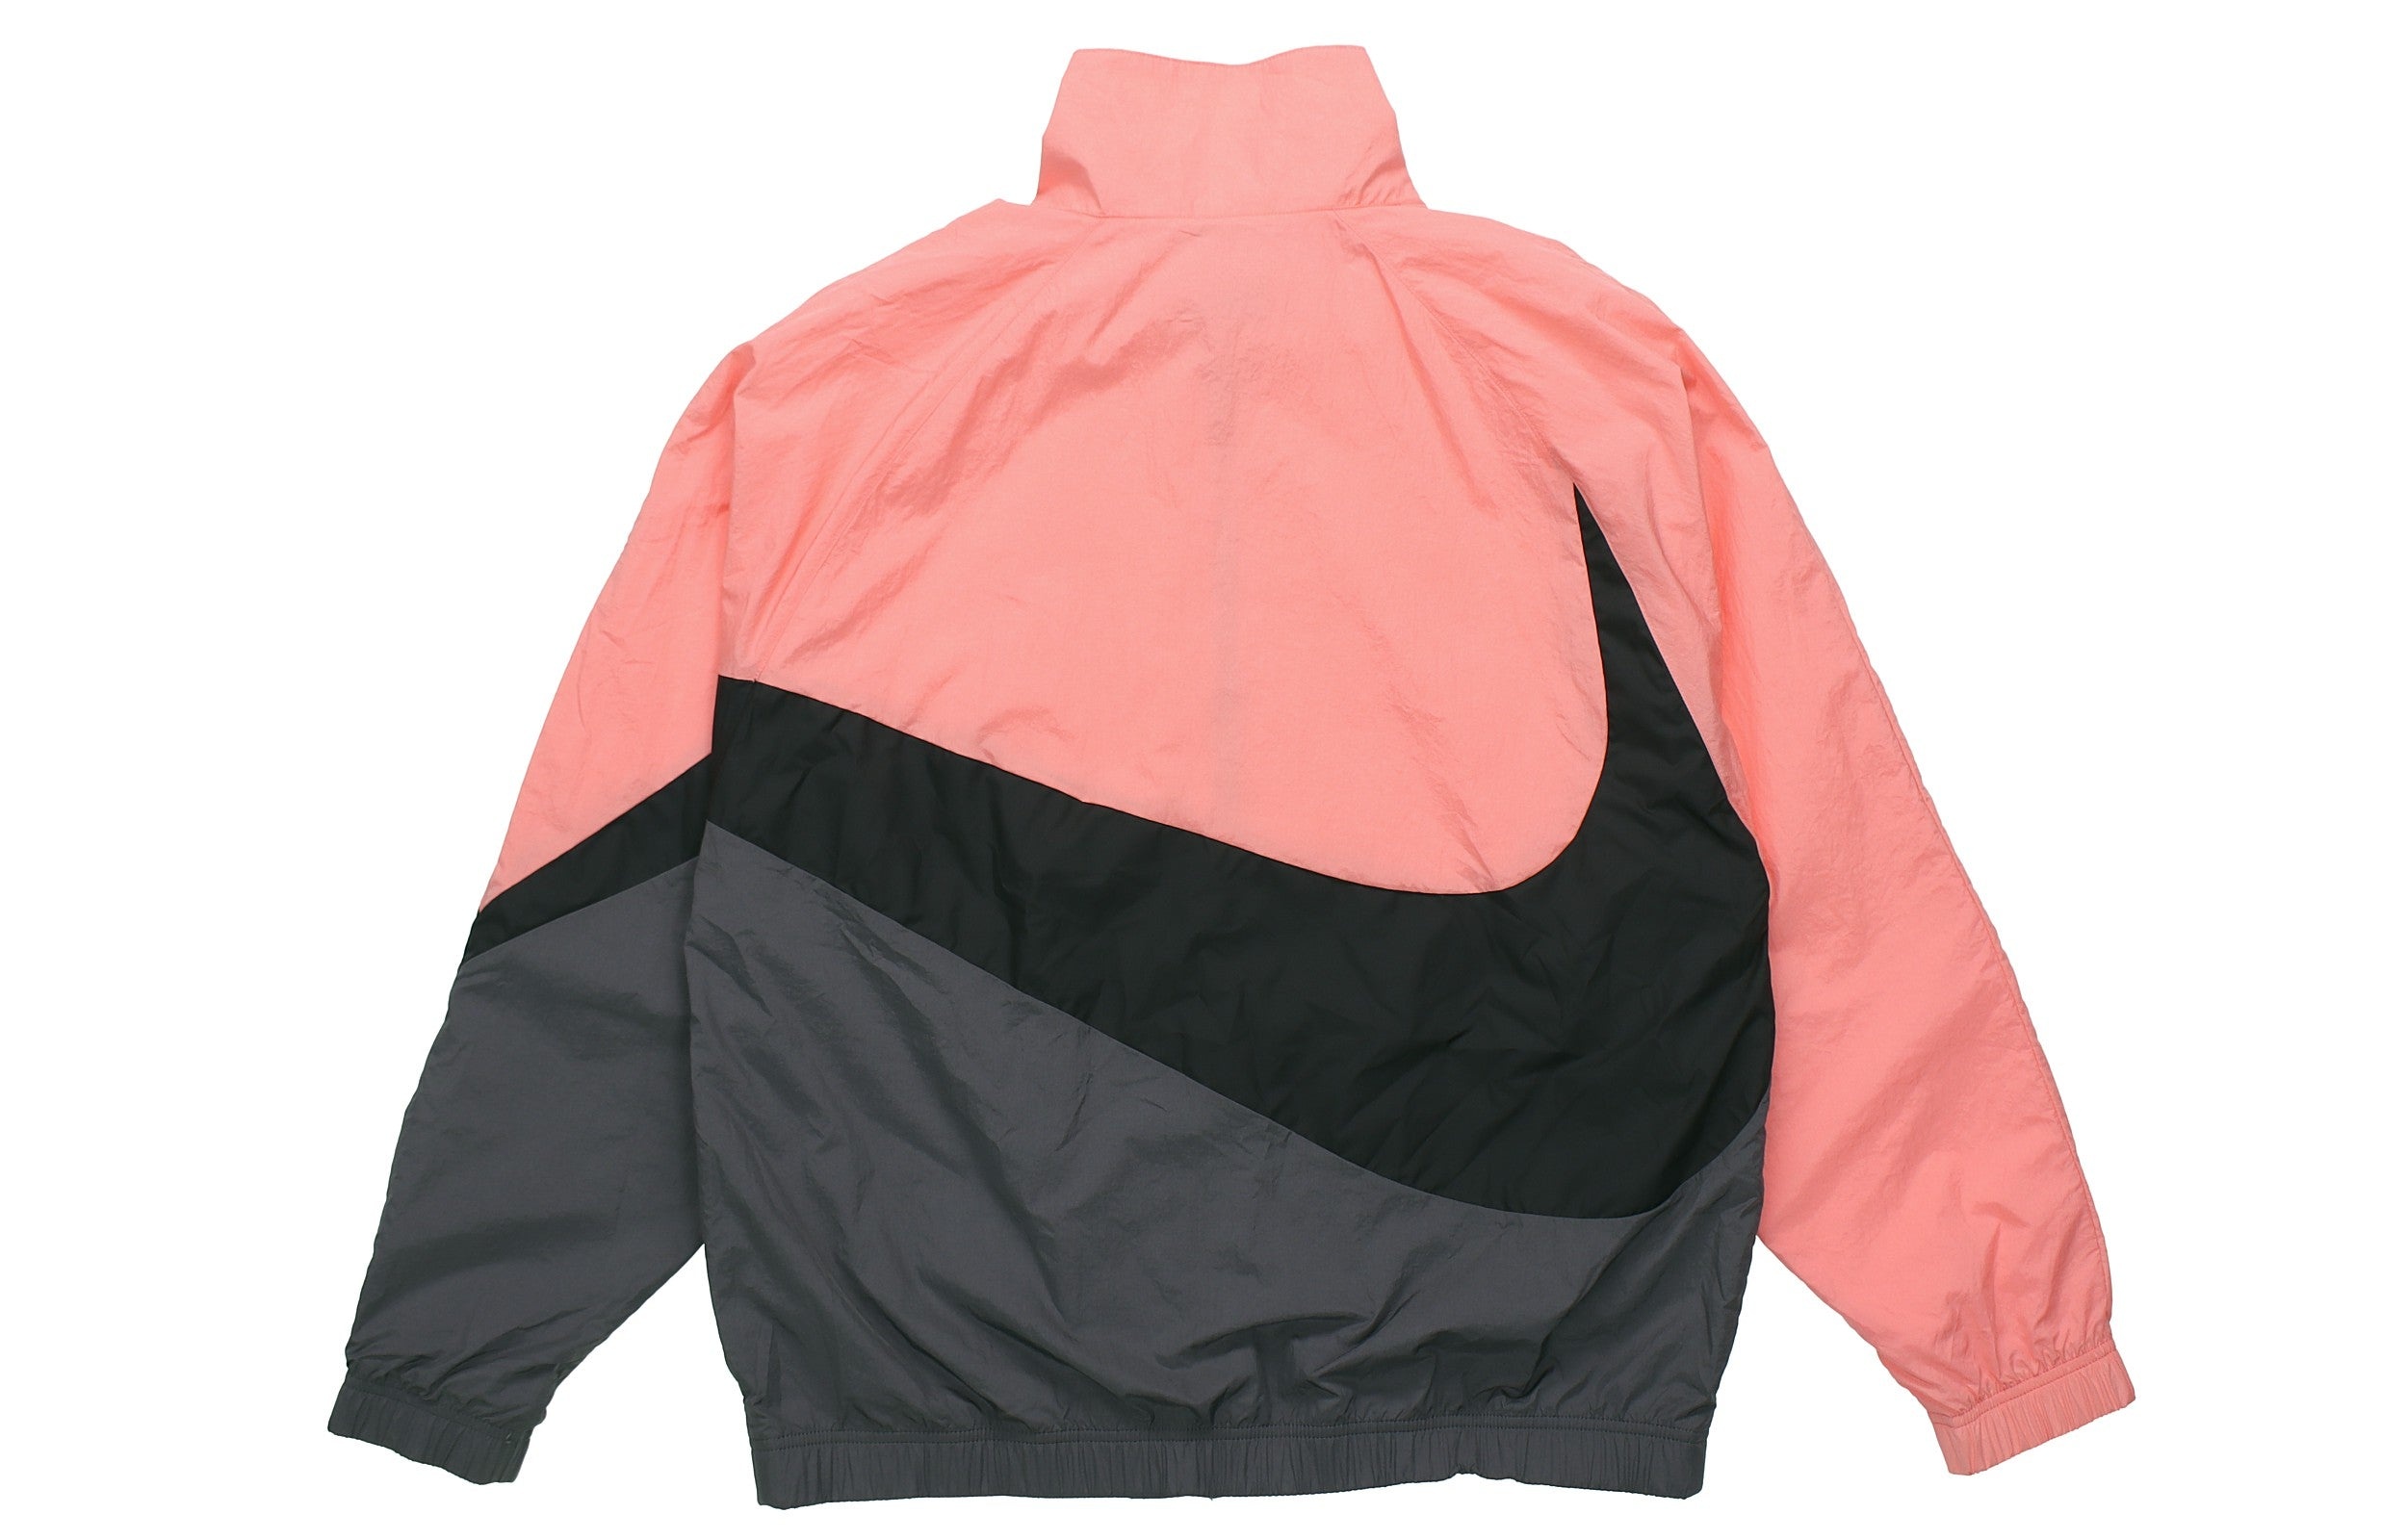 Nike Men's Sports Jacket Stand Collar Color Block 'Black Gray Pink' AR3133-668 - 2